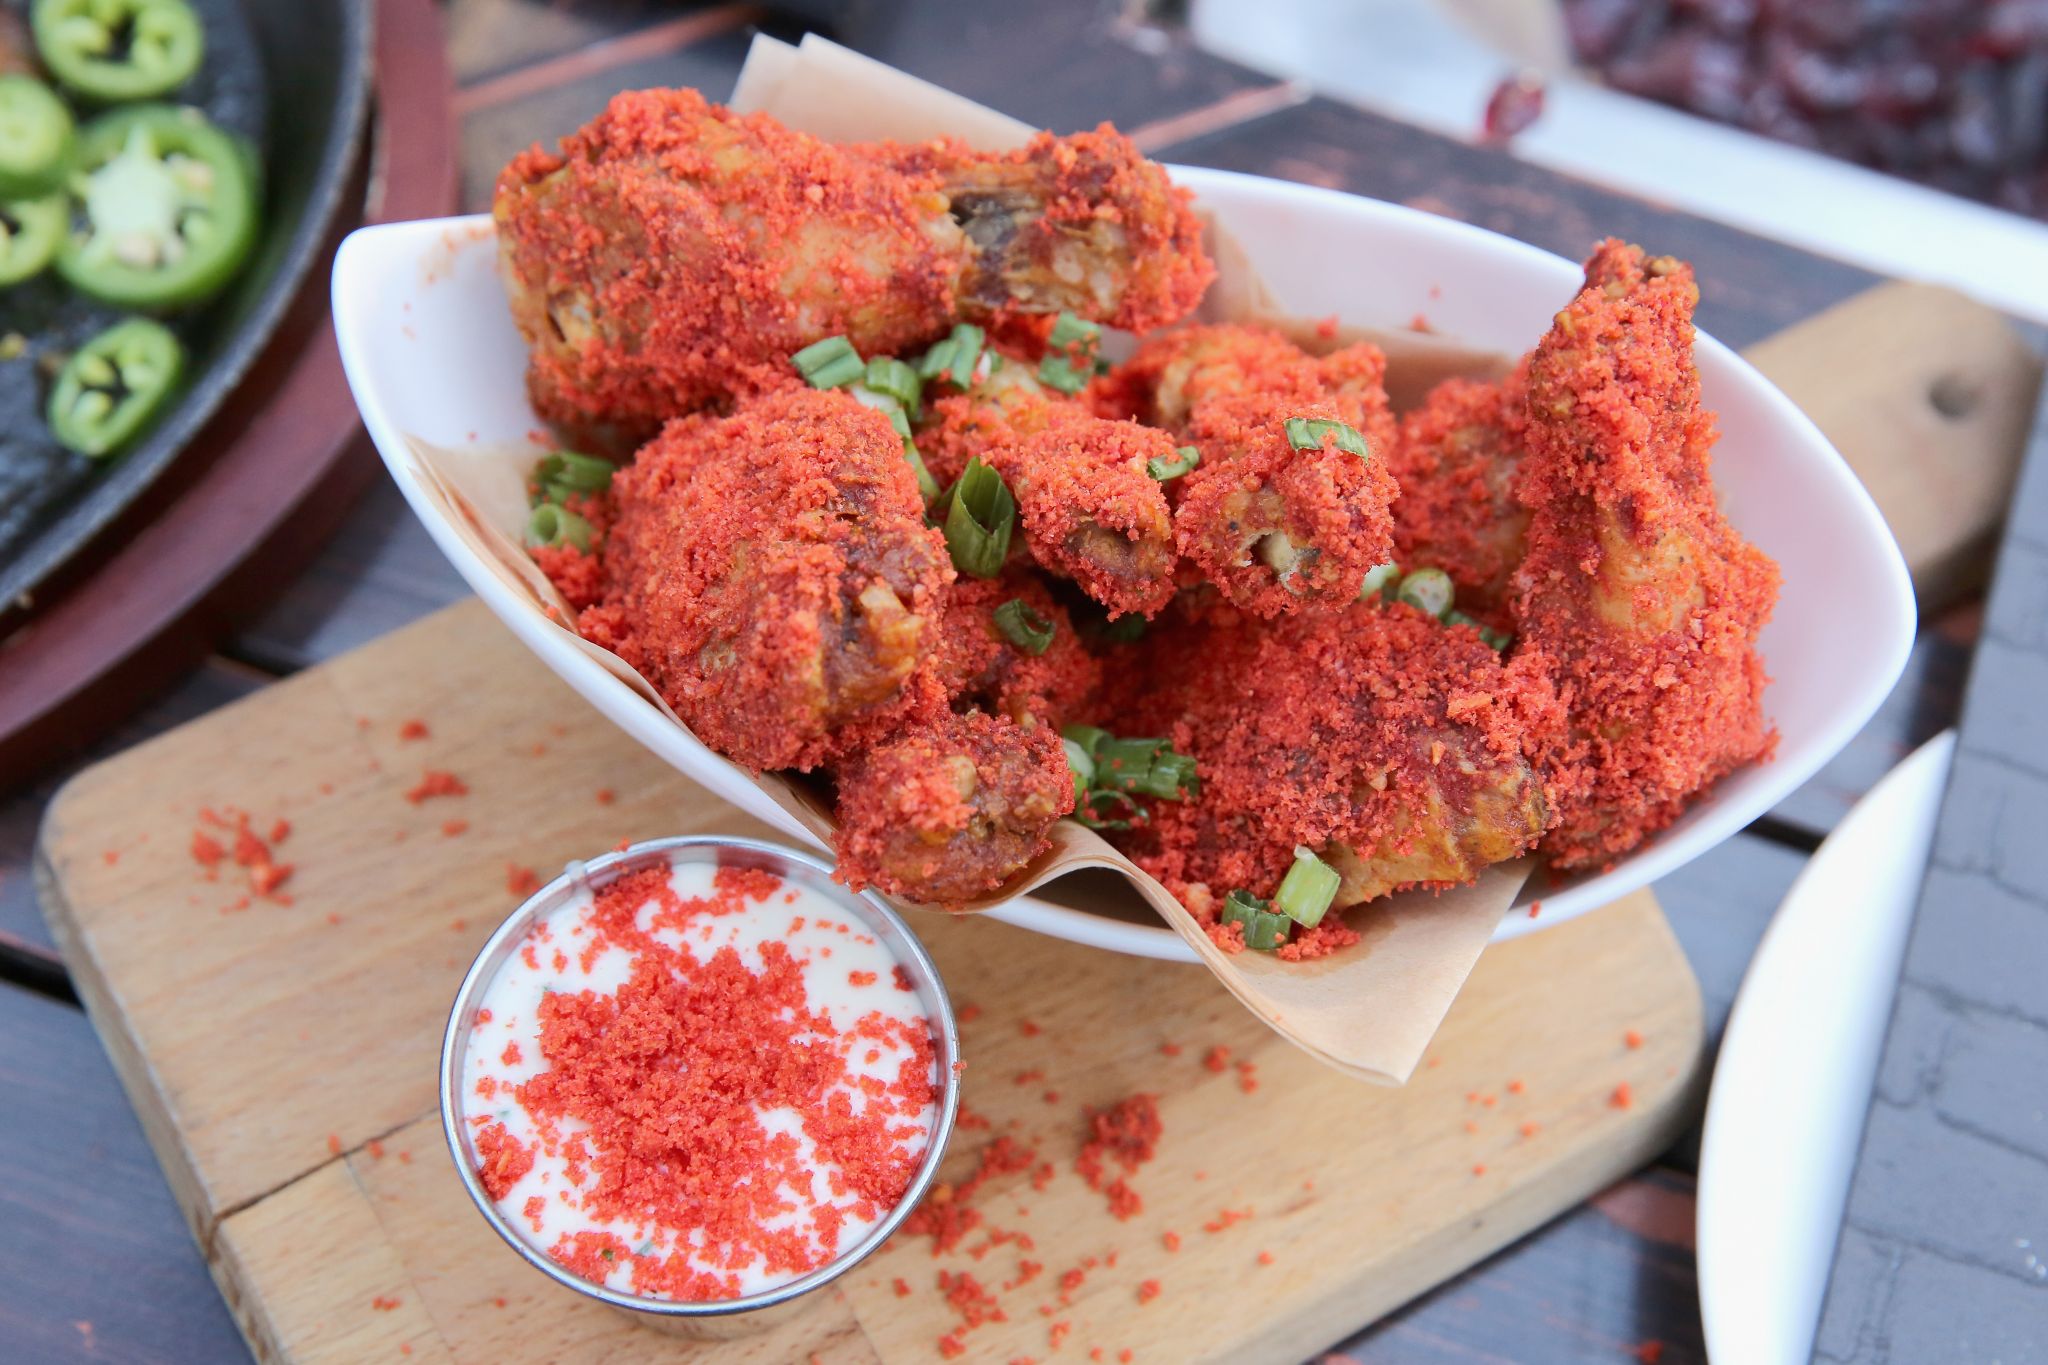 Here's where you can satisfy your Flamin' Hot Cheetos craving in Houston